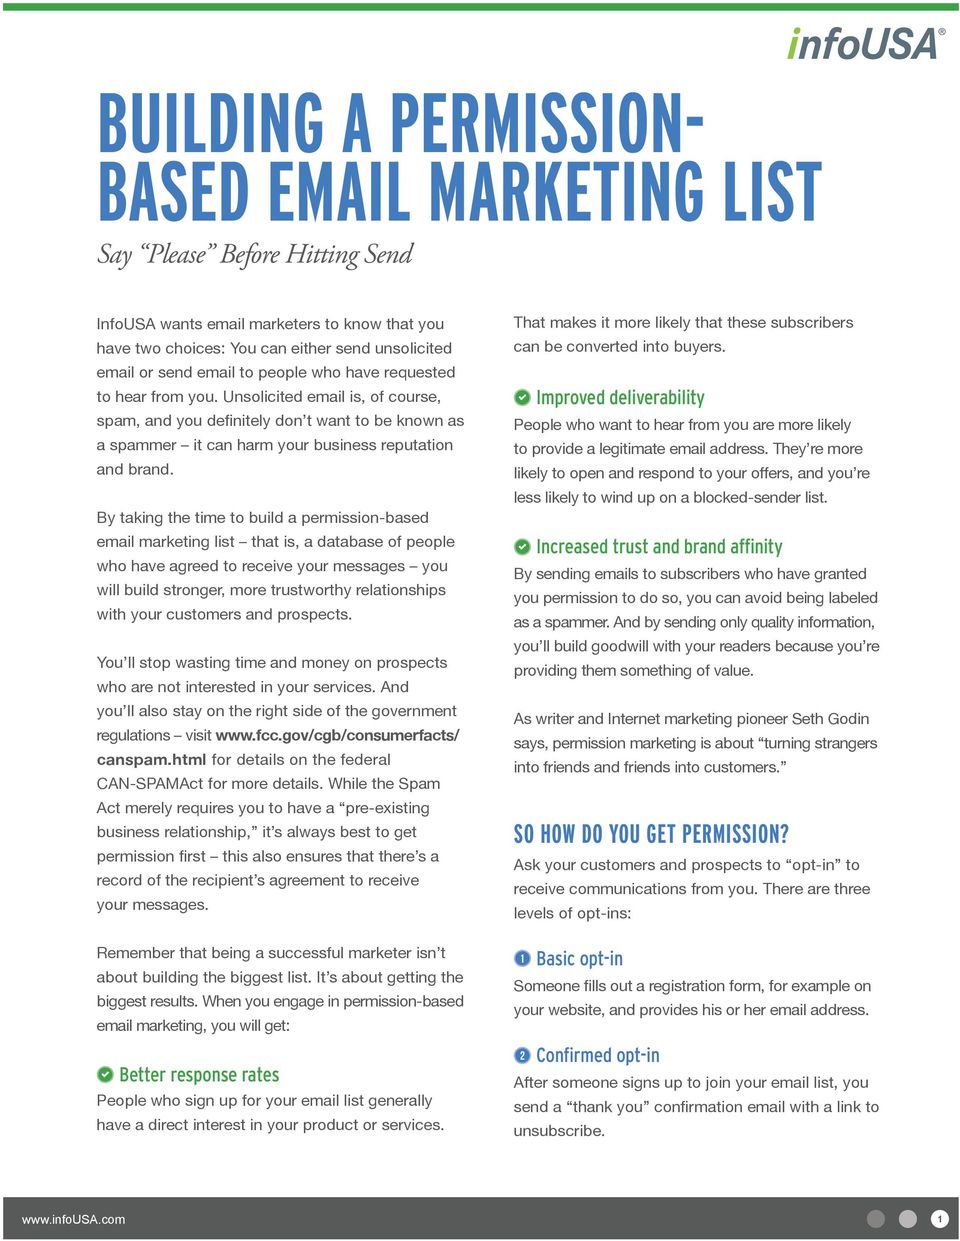 By taking the time to build a permission-based email marketing list that is, a database of people who have agreed to receive your messages you will build stronger, more trustworthy relationships with